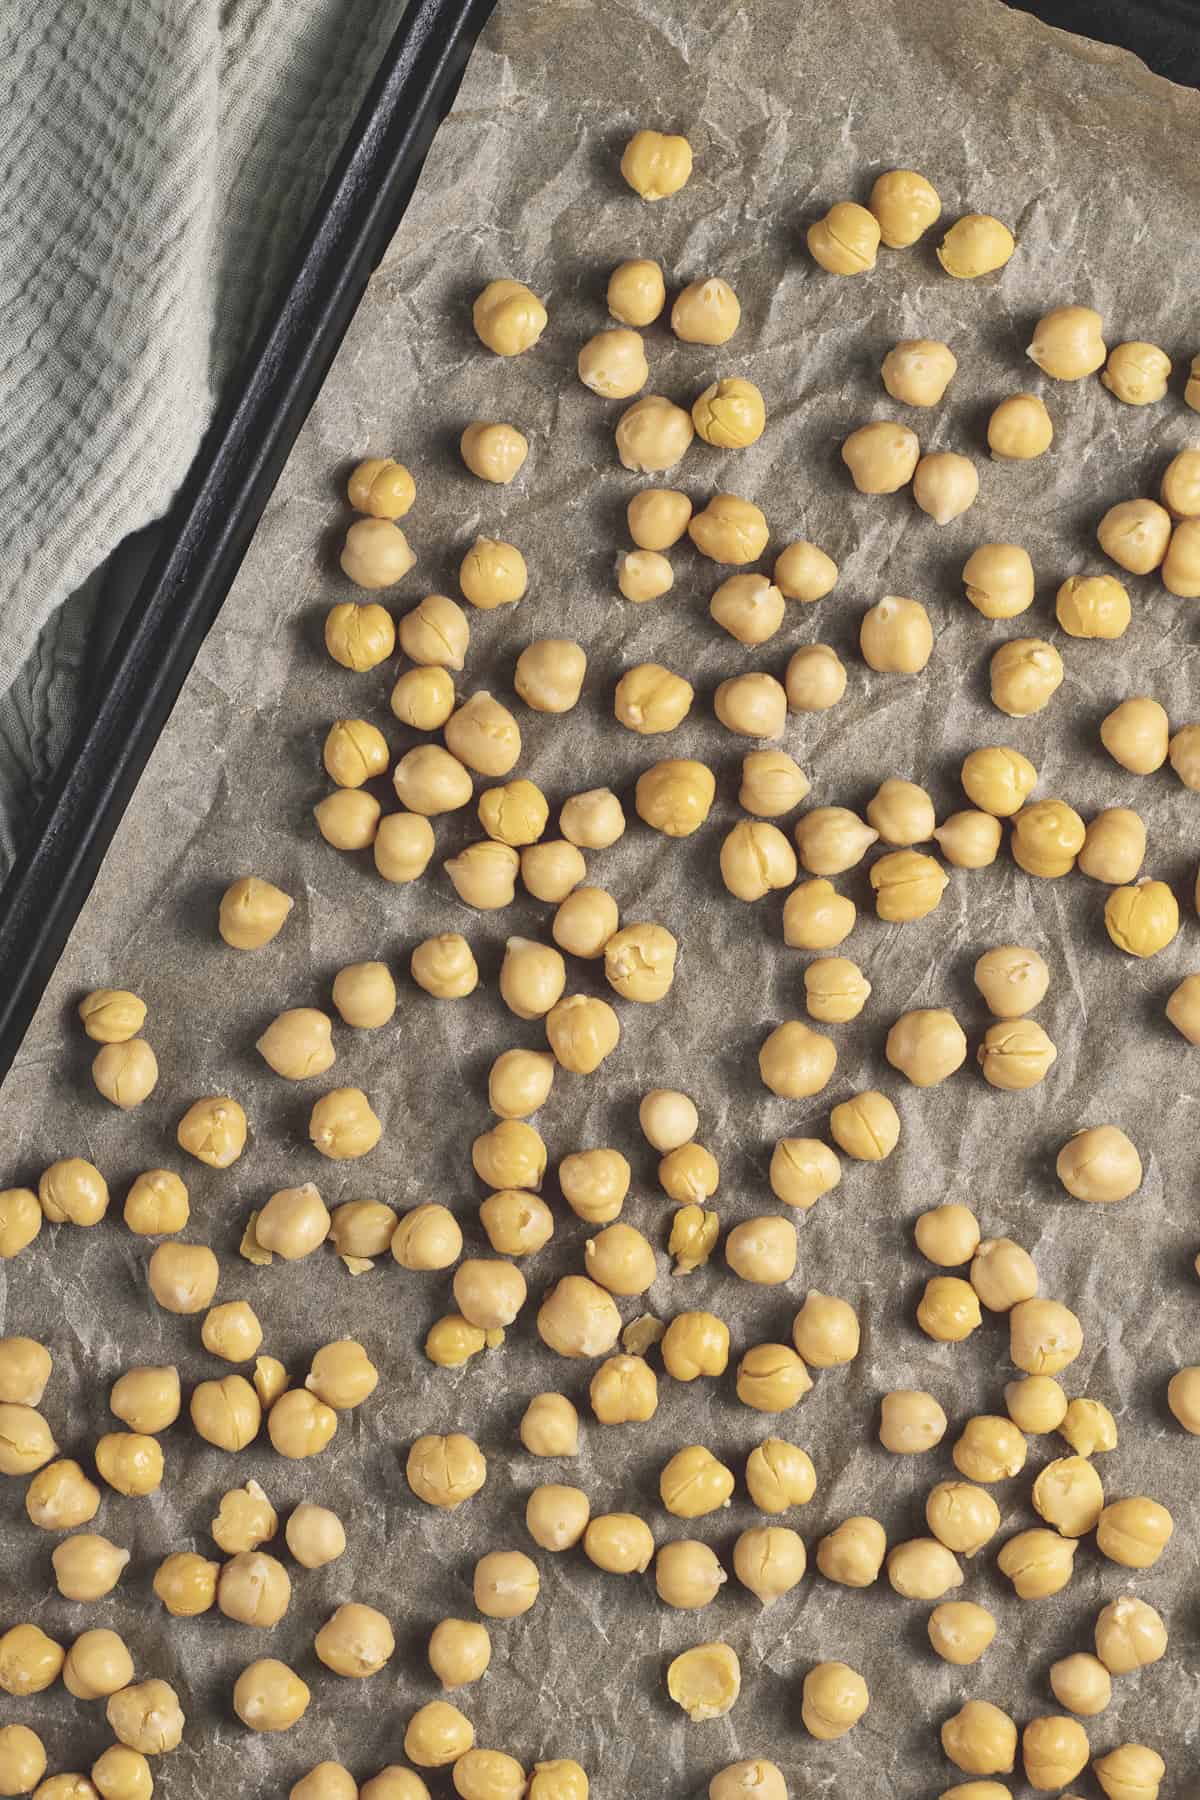 Unseasoned chickpeas spread evenly on a baking sheet lined with unbleached parchment paper and a sage cloth beside.